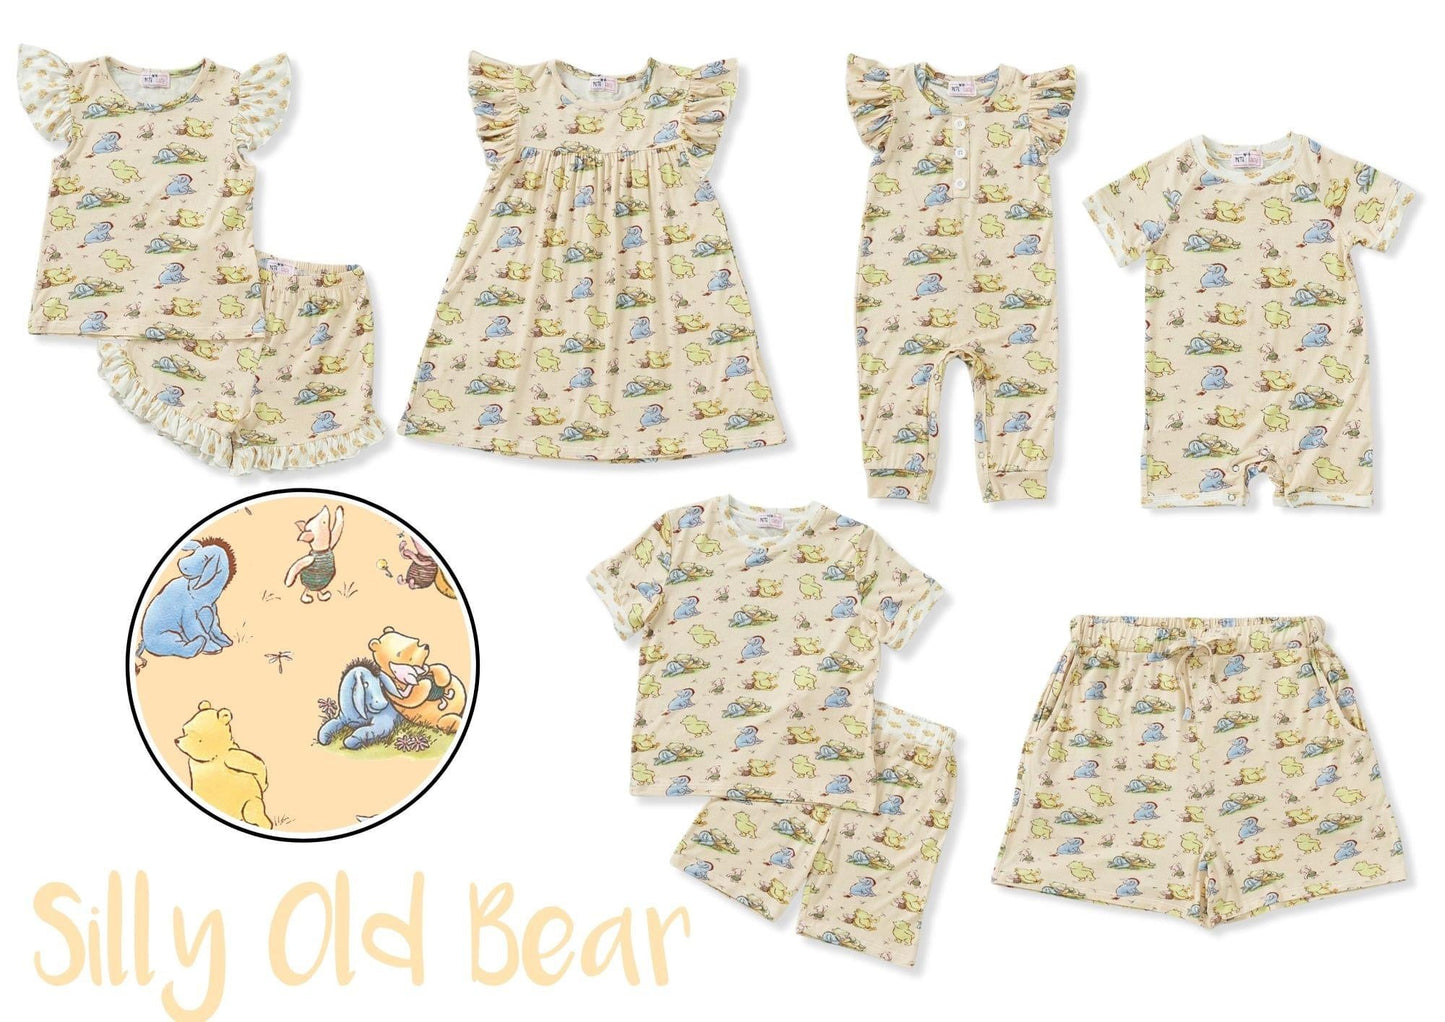 (Preorder) Silly Old Bear Tulle Dress by Pete + Lucy